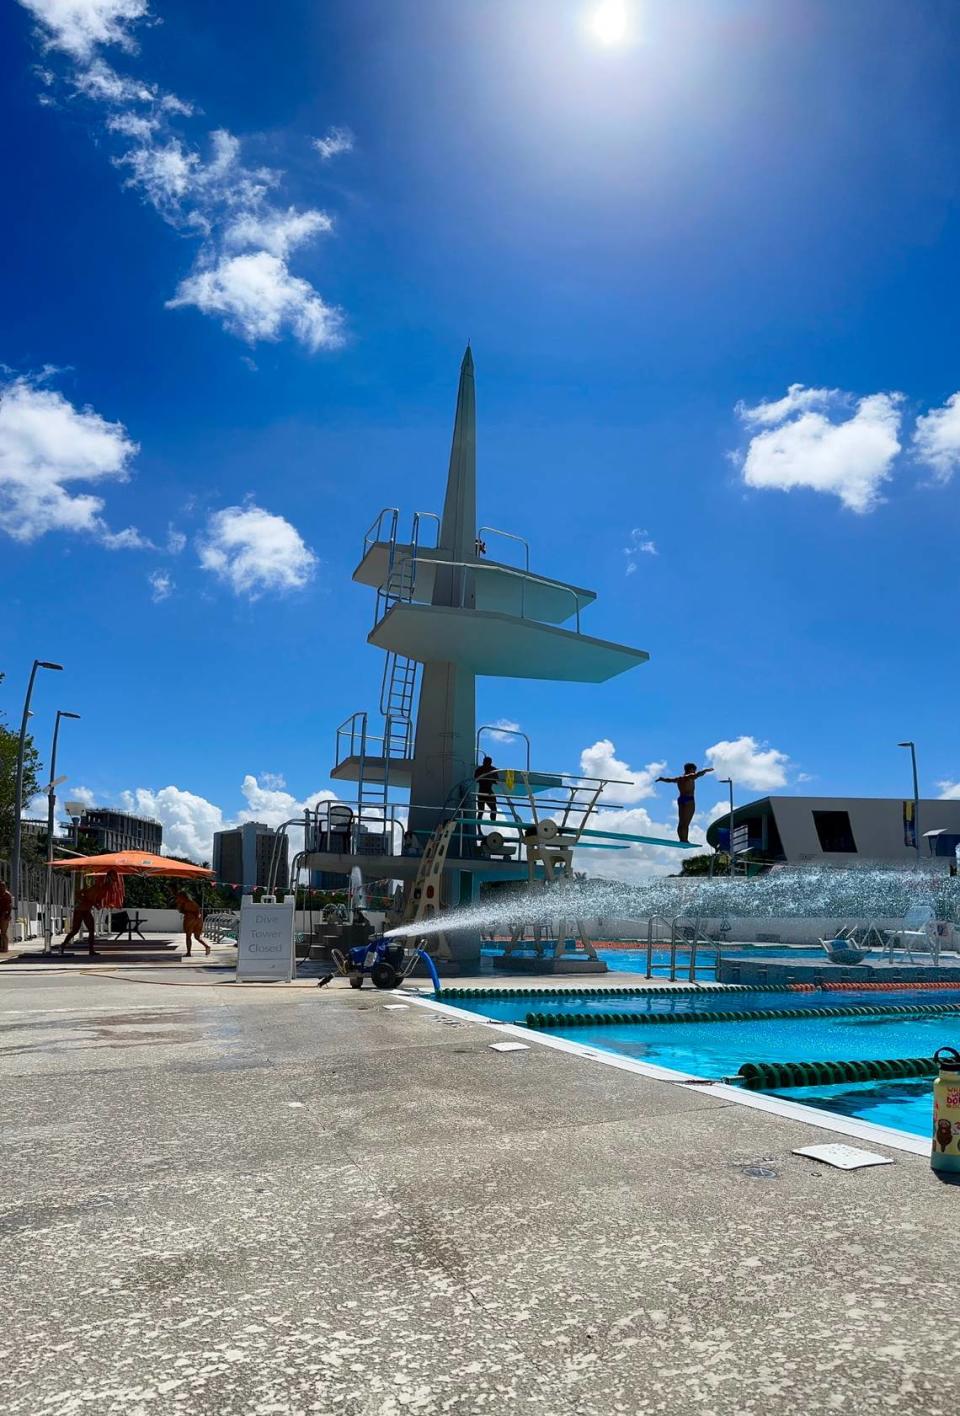 Even with an aerator working hard to cool off the waters of the University of Miami’s competitive 50-meter outdoor pool, a high heat index and temperatures in the 90s made it hard to beat the heat on June 15, 2023.